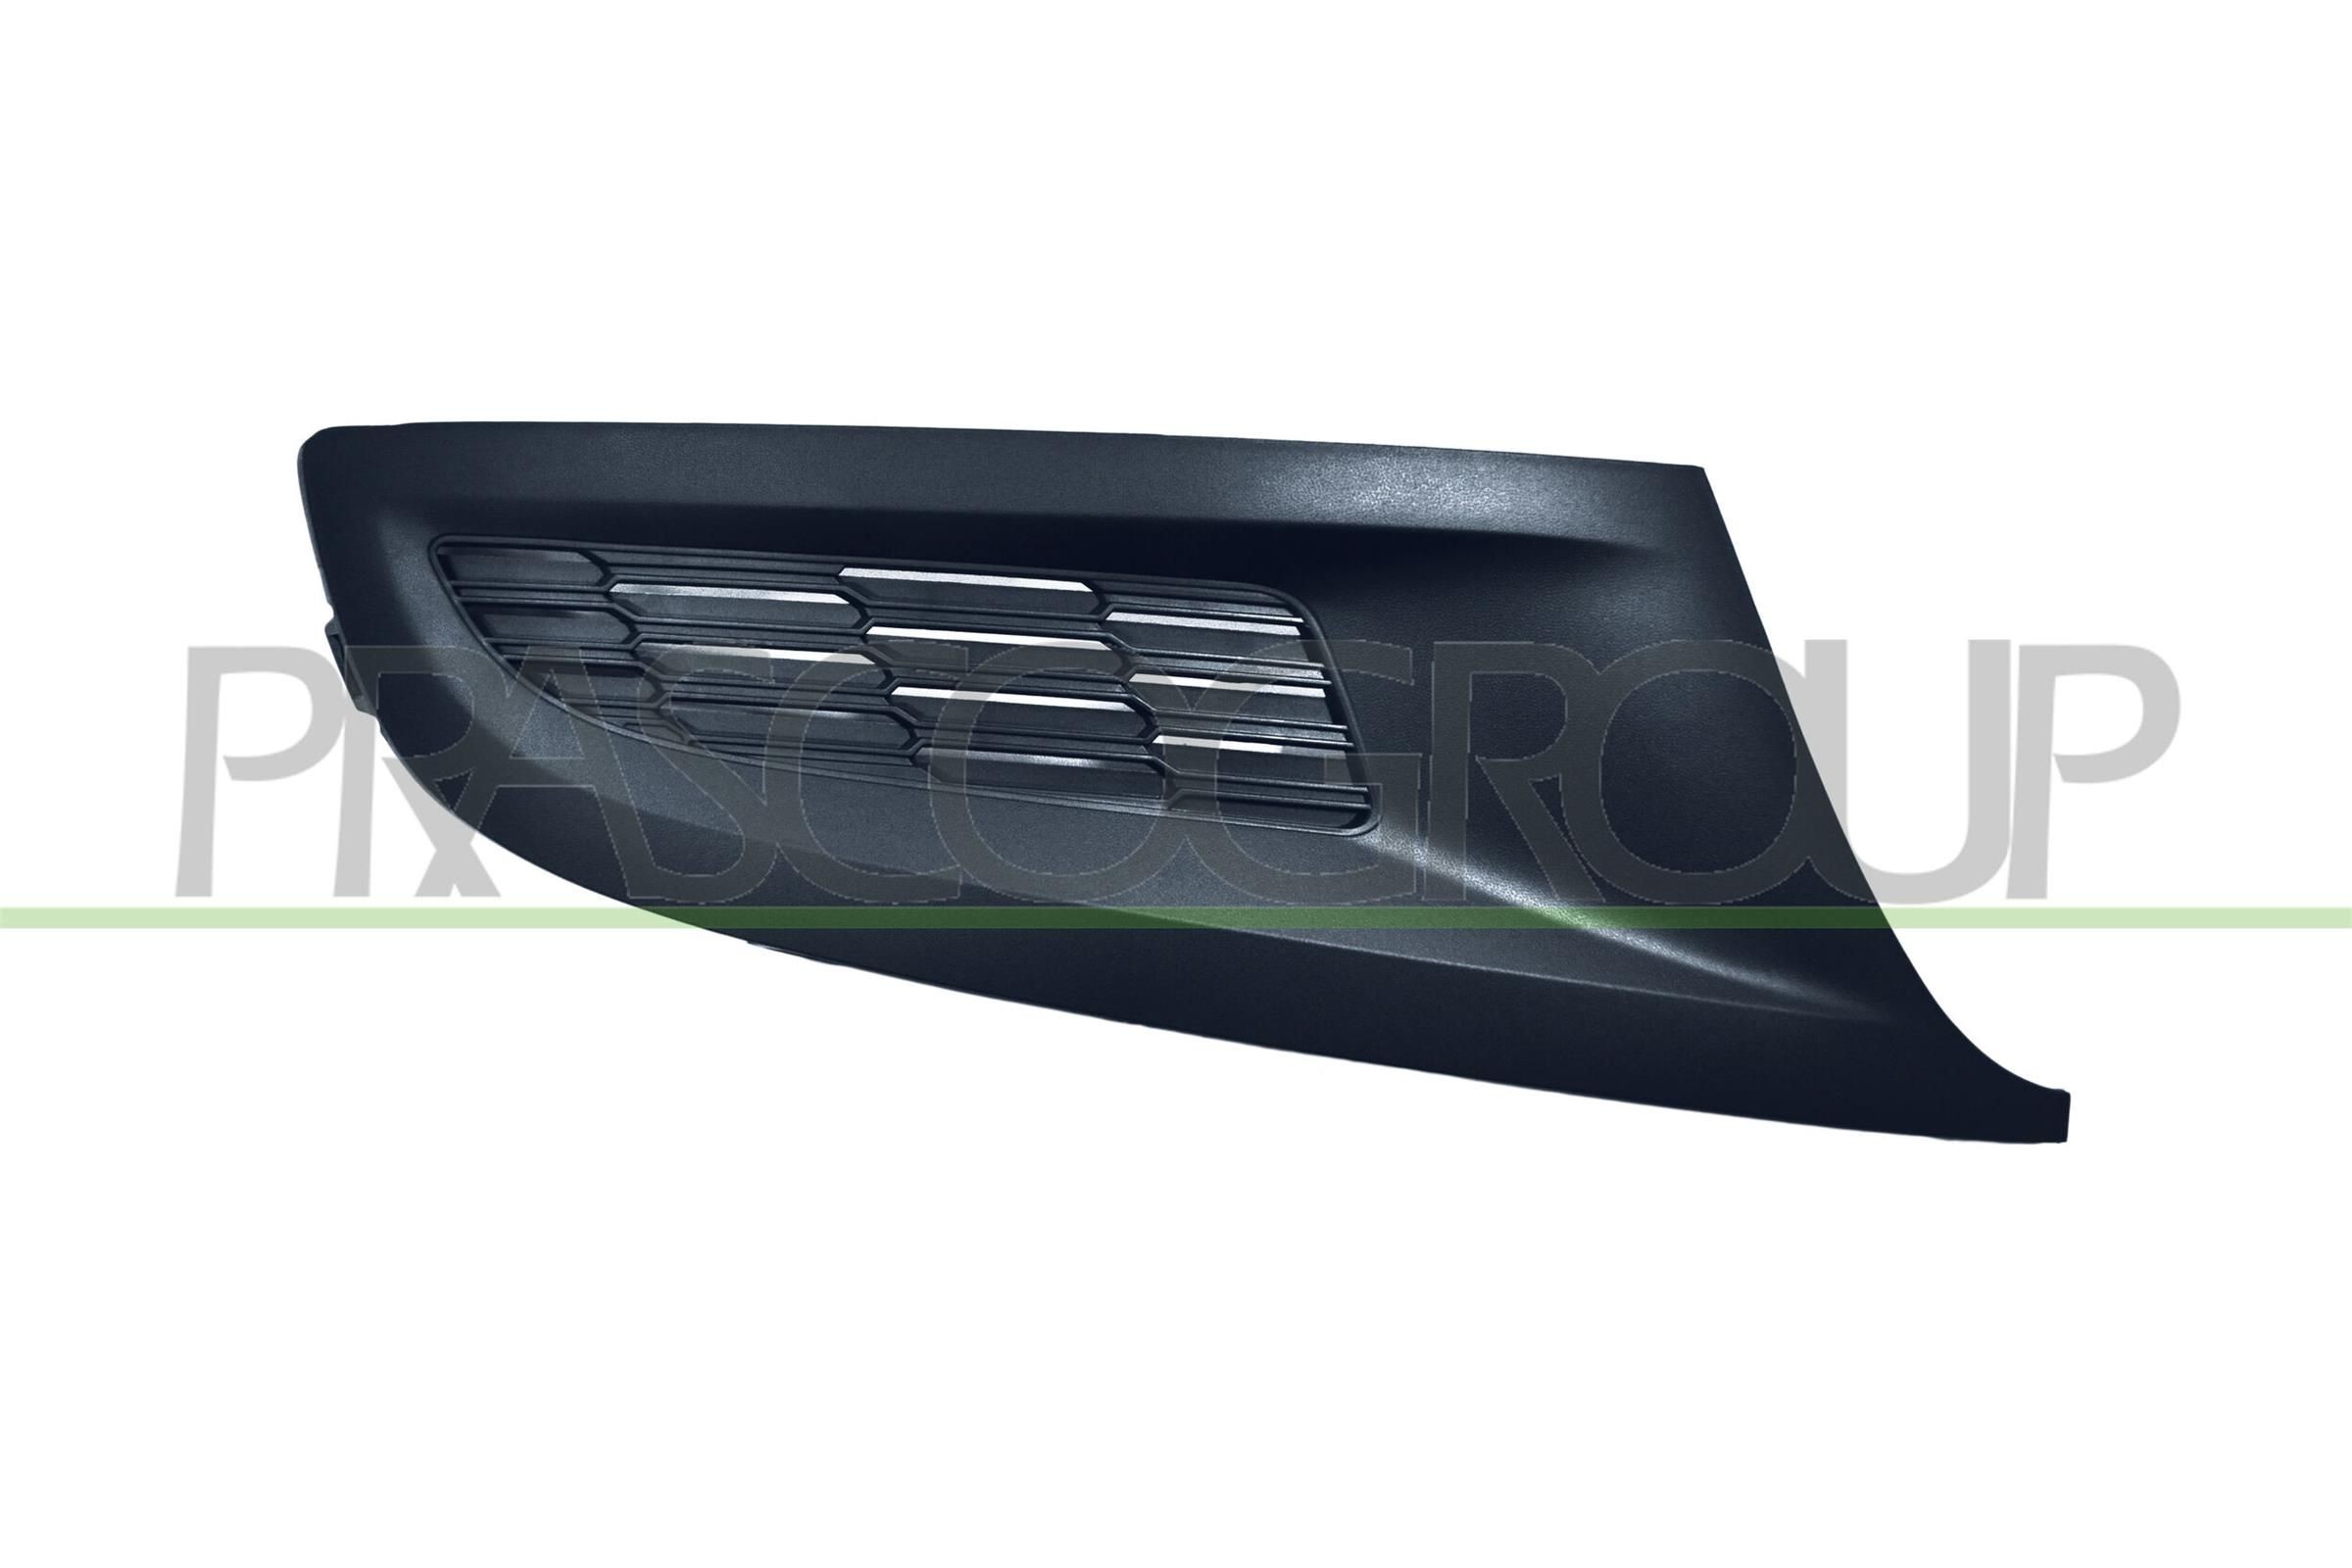 VG0232123 Bumper grille VG0232123 PRASCO without hole(s) for fog lights, Fitting Position: Right Front, Premium